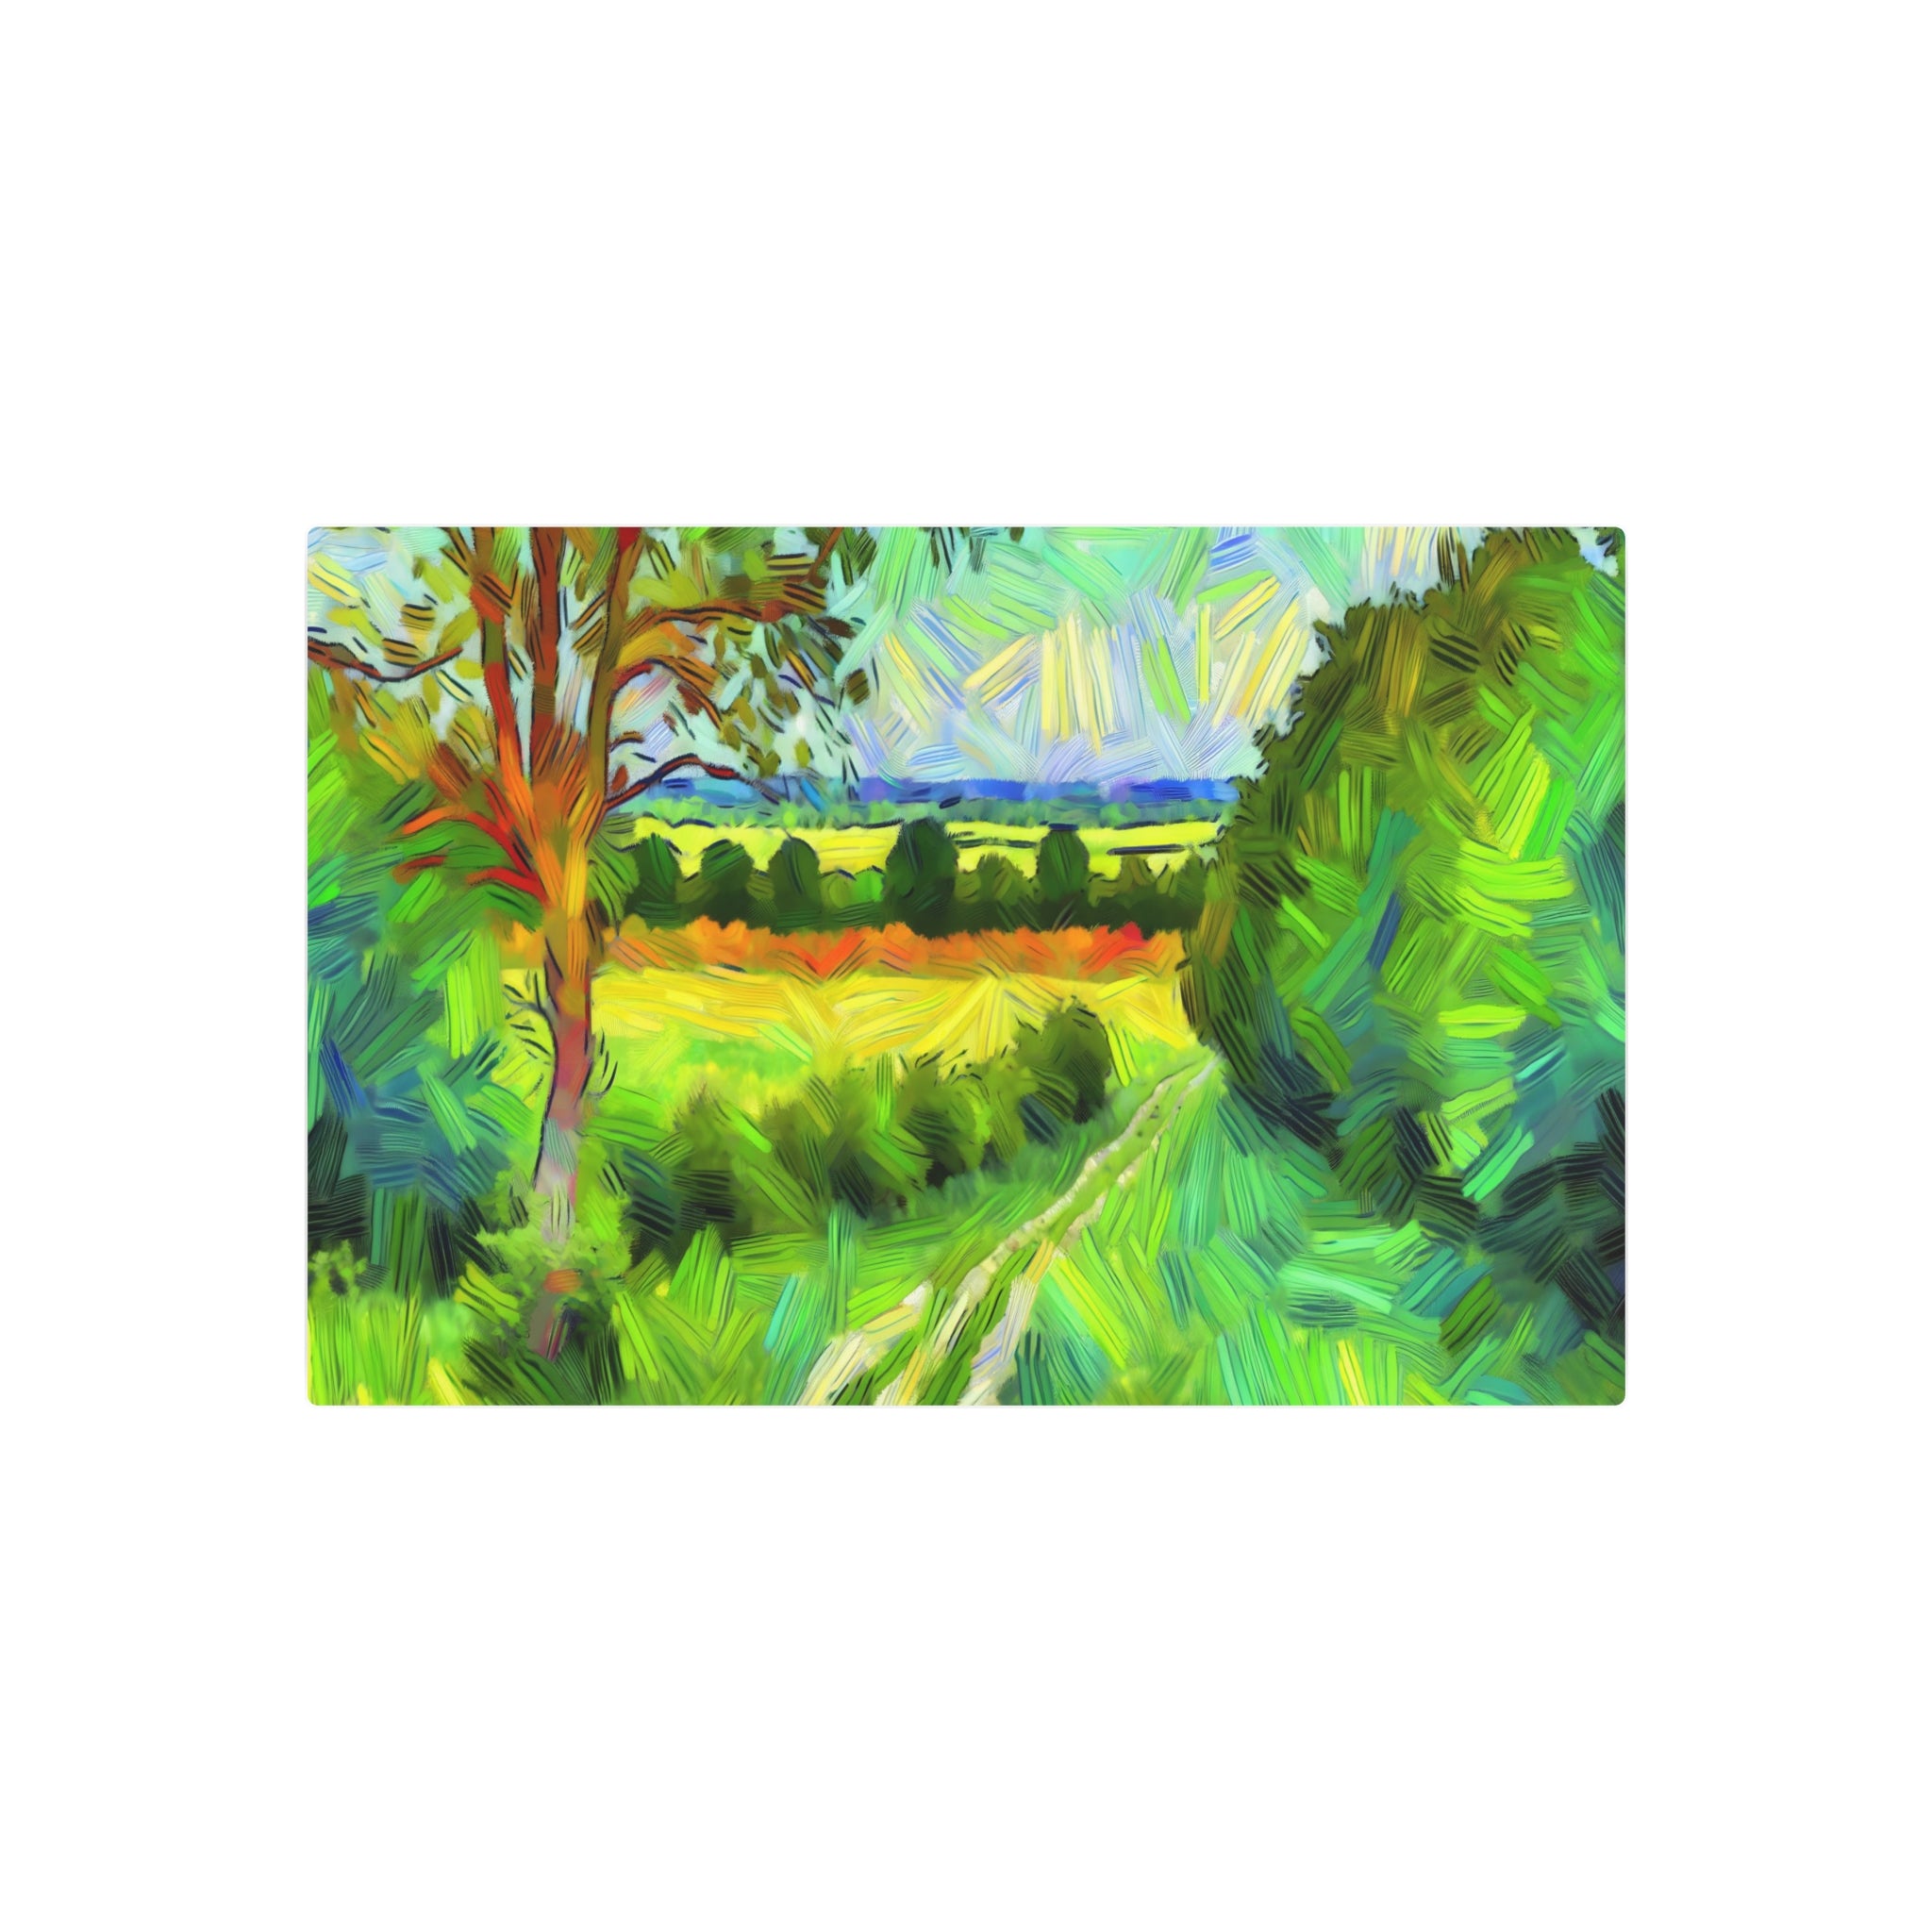 Metal Poster Art | "Vibrant Post-Impressionist Countryside Landscape Artwork - Colorful Western Art Style Dalle-3 Image with Fields, Trees and